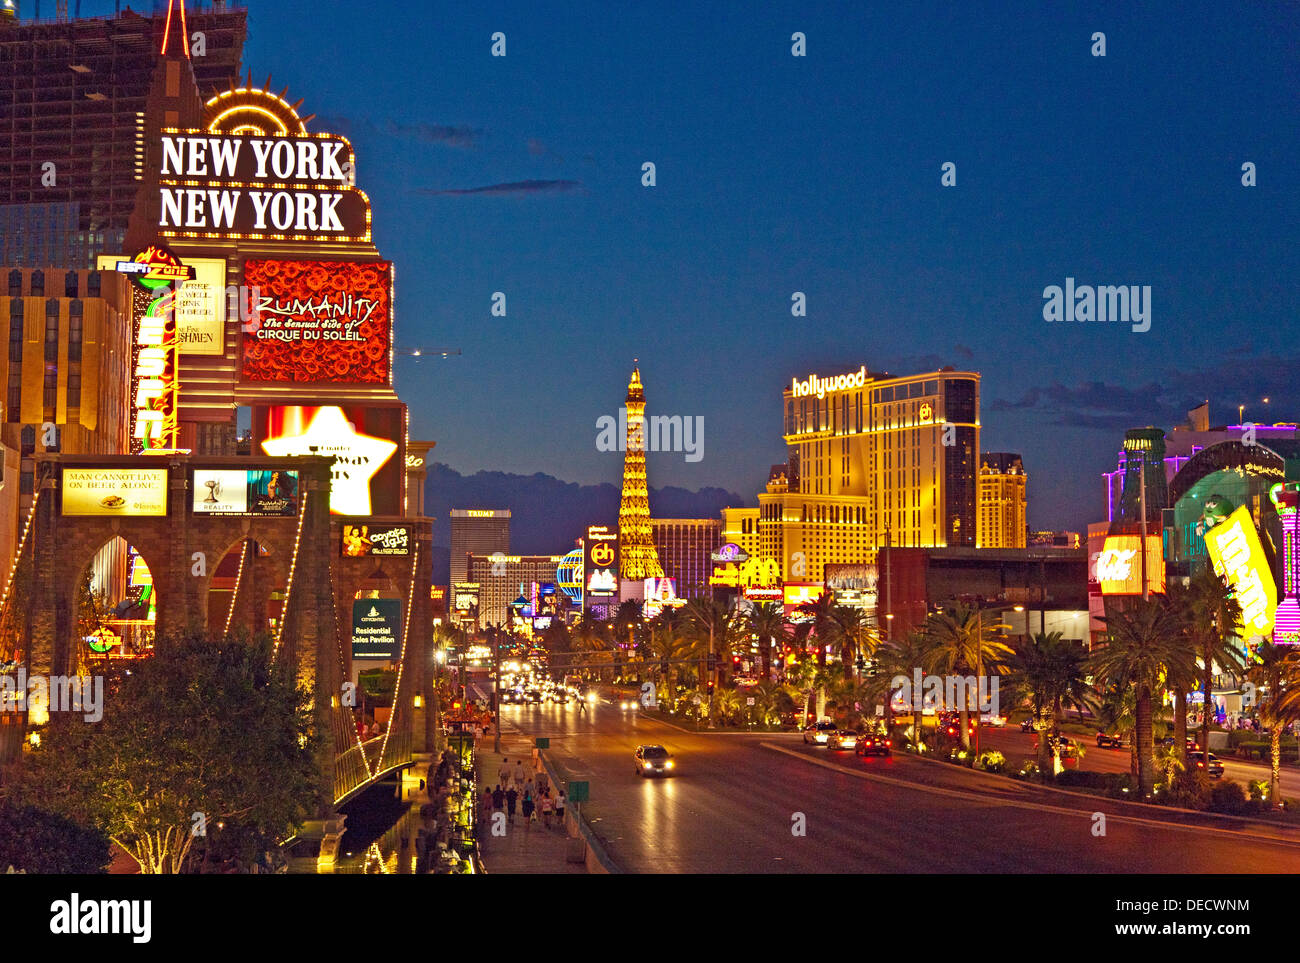 Looking North along the Strip to Paris and Hollywood from New York-New York at dusk. JMH5414 Stock Photo